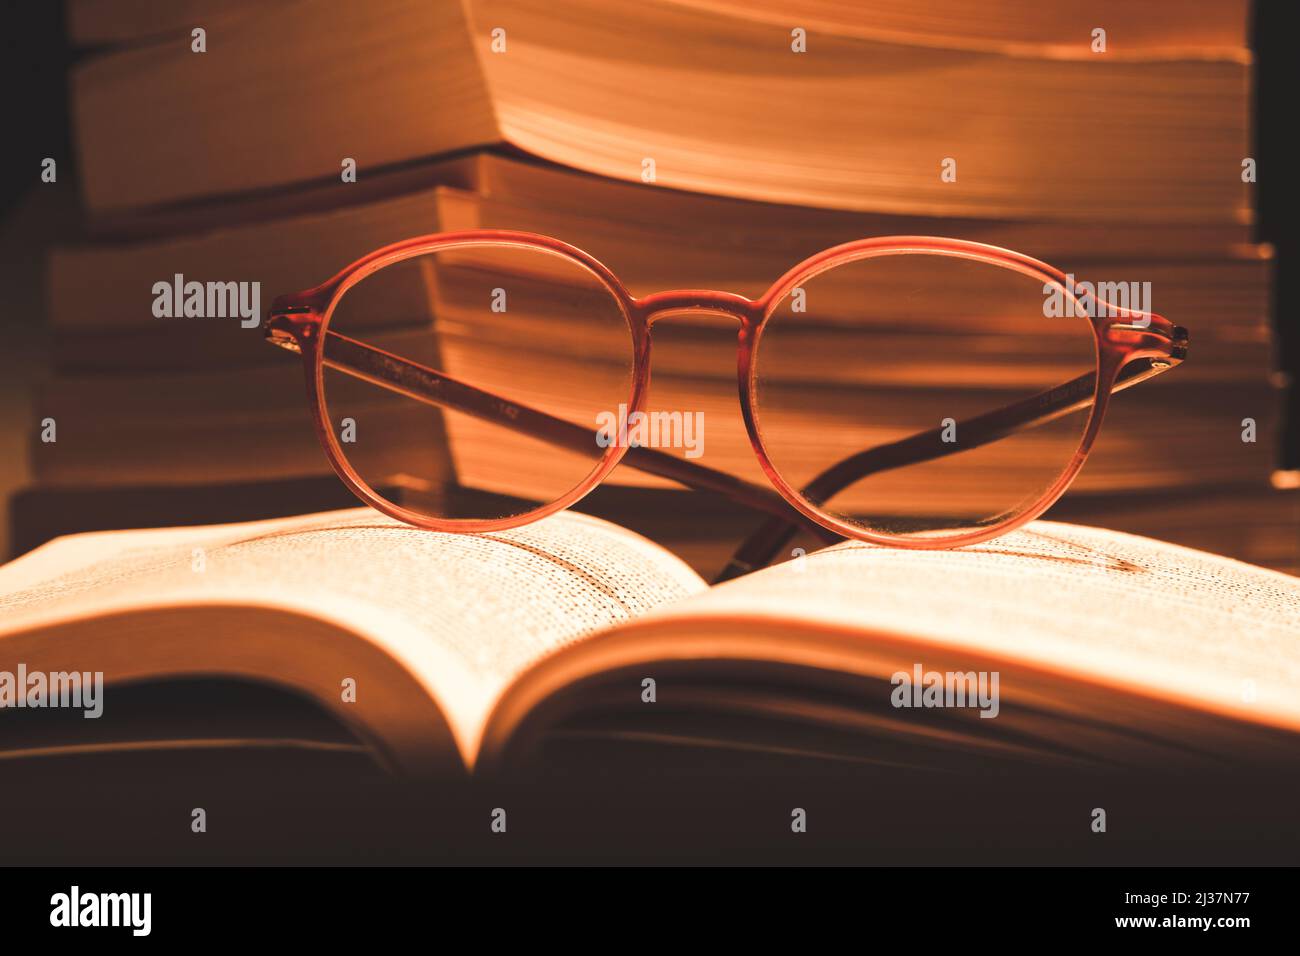 Glasses on book in selective focus. Books stacked out of focus. Book reading, education, rest, knowledge concept vintage background. Stock Photo